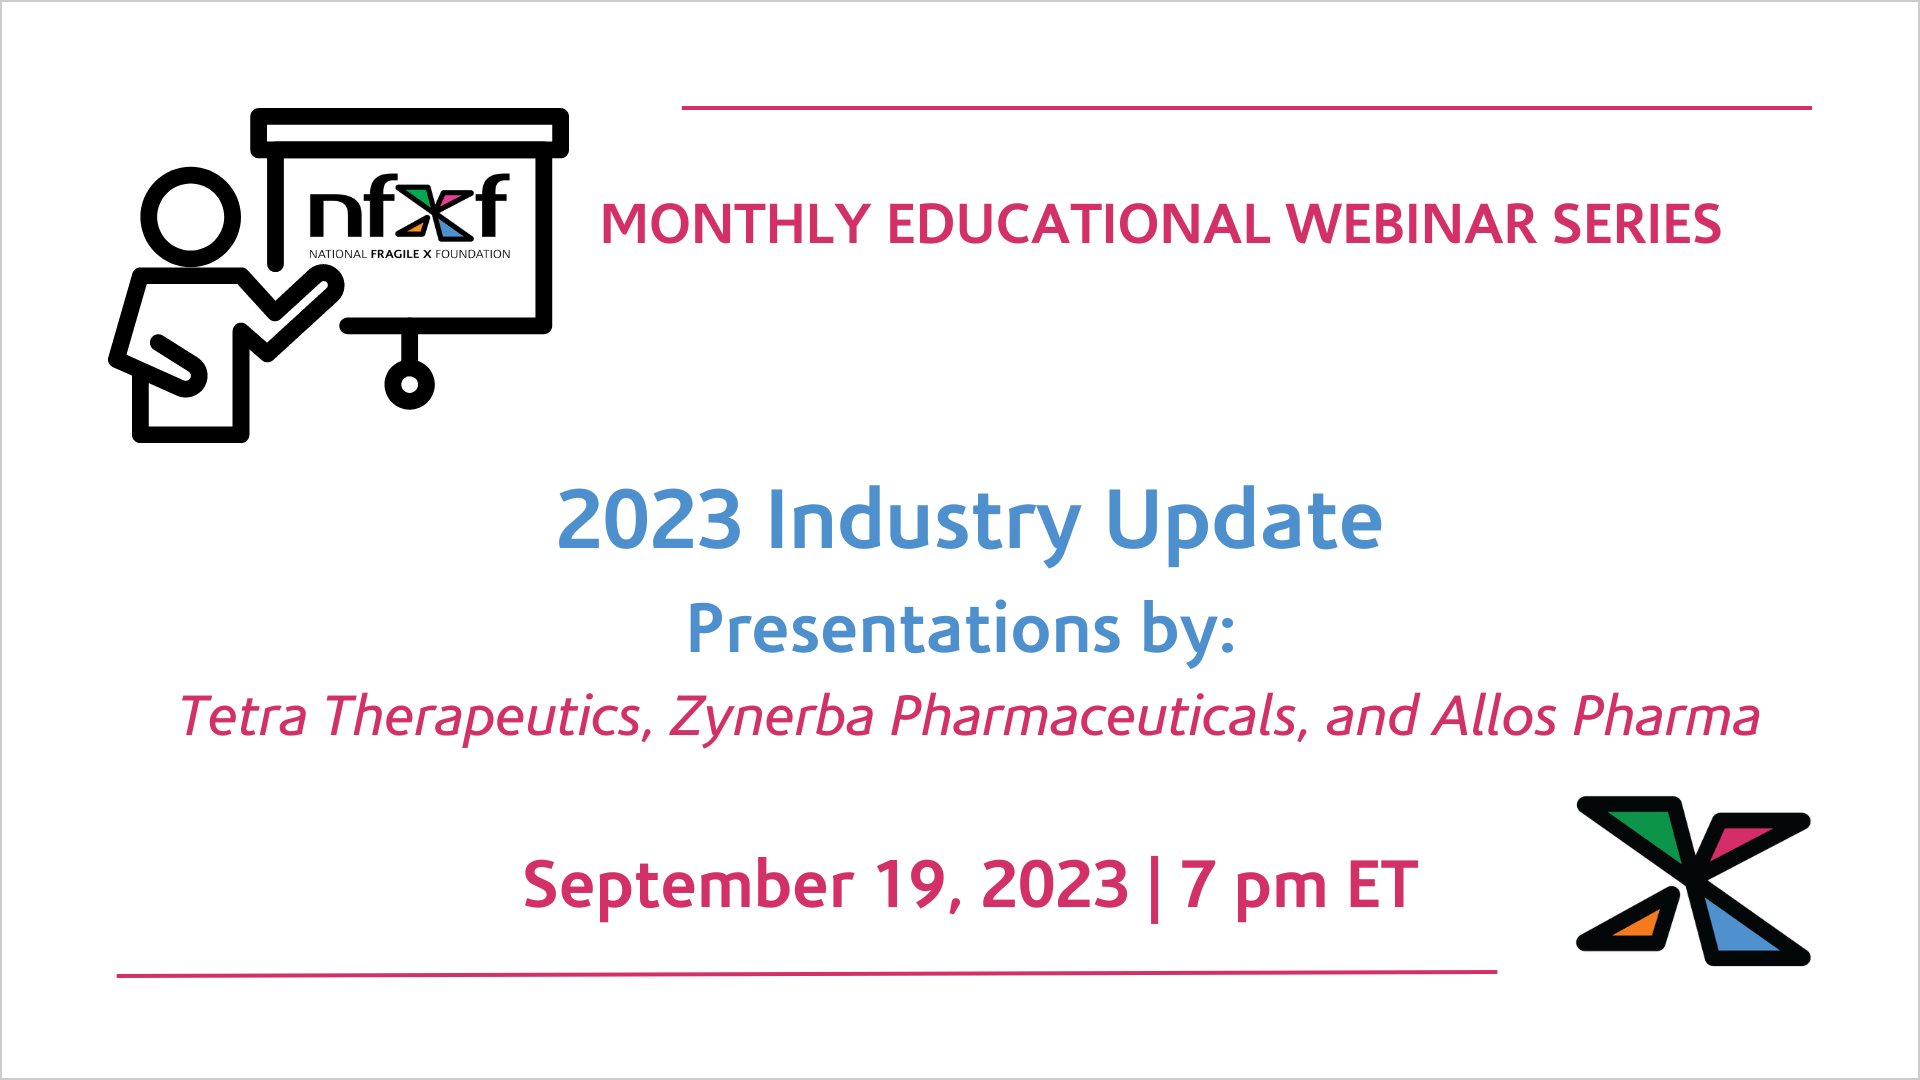 Monthly Education Webinar Series: 2023 Industry Update. Presentations by: Tetra Therapeutics, Zynerba Pharmaceuticals, and Allios Pharma. September 19, 2023, 7 pm ET.